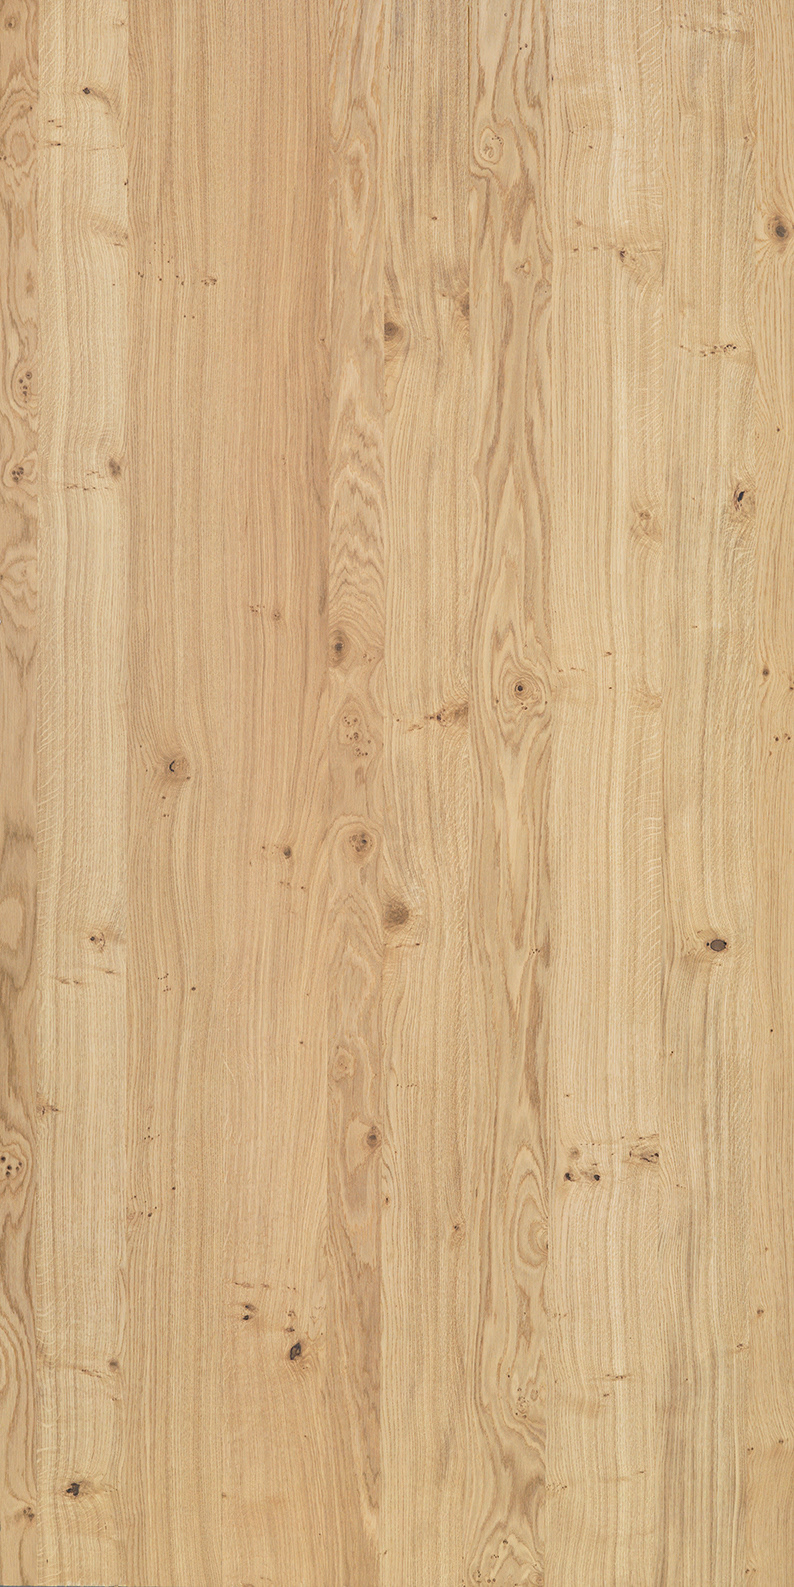 Pine Wood : The Benefits of Pine Wood for Furniture and Home Decor